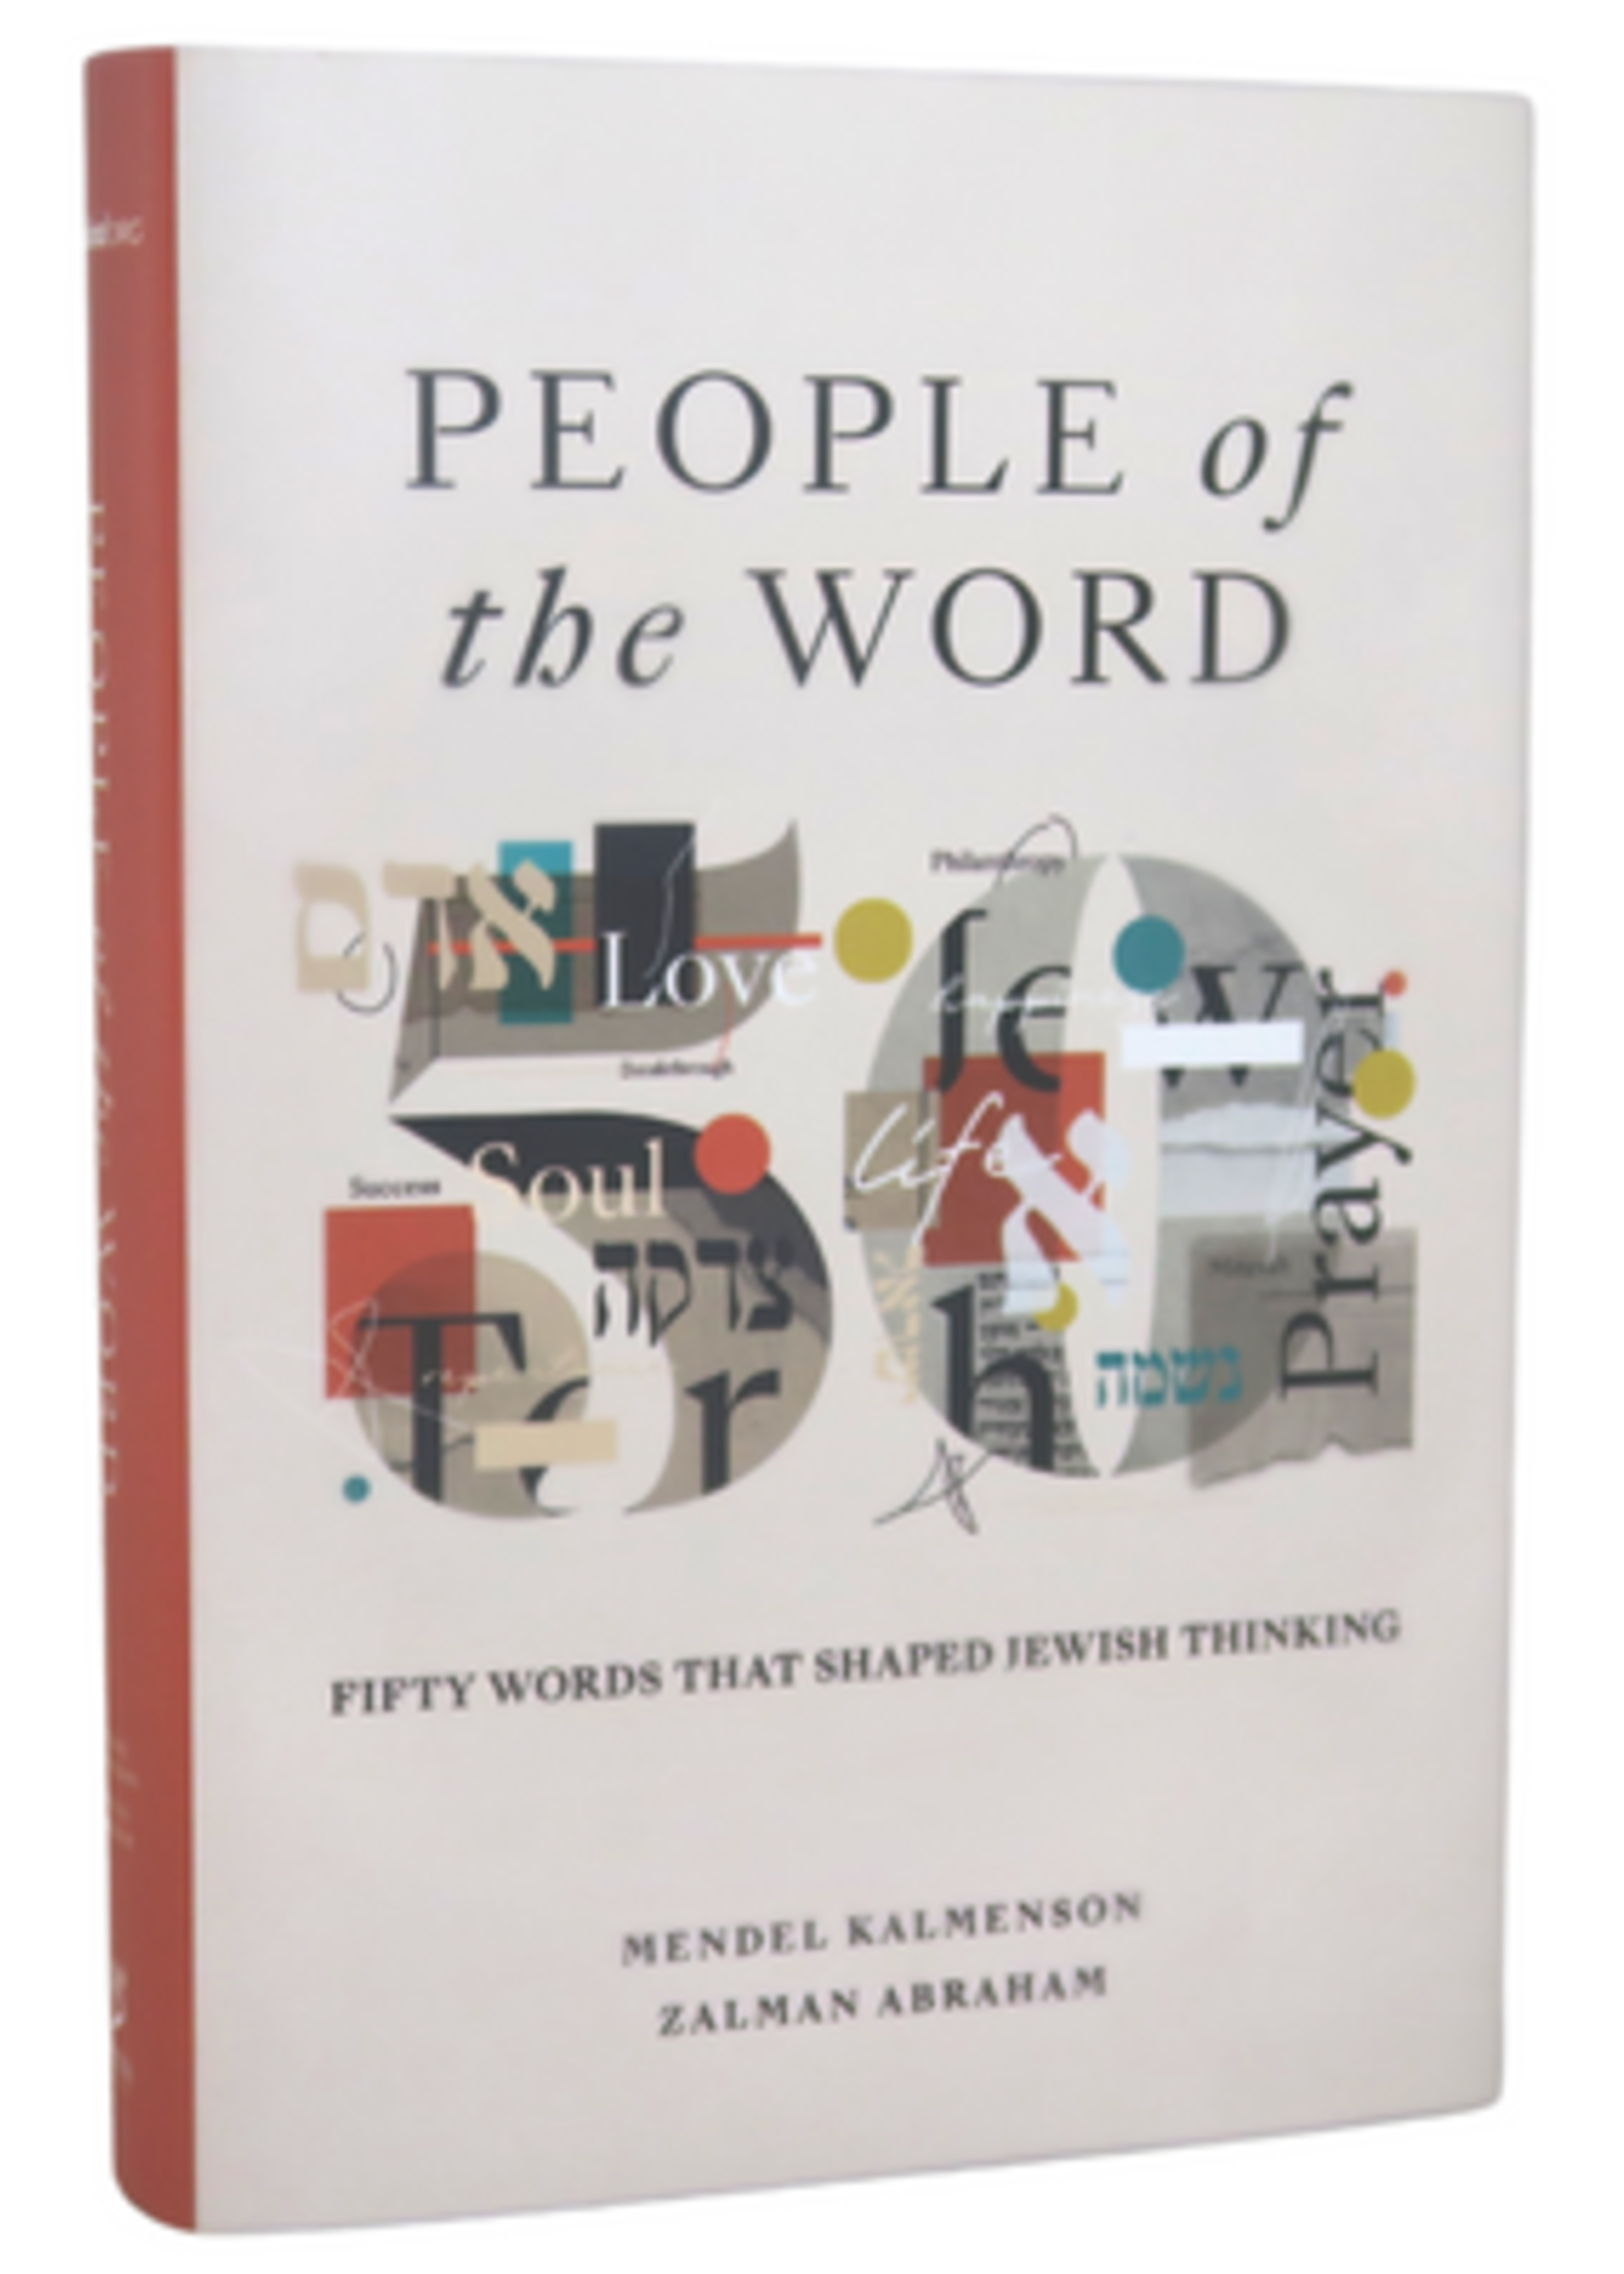 PEOPLE OF THE WORD